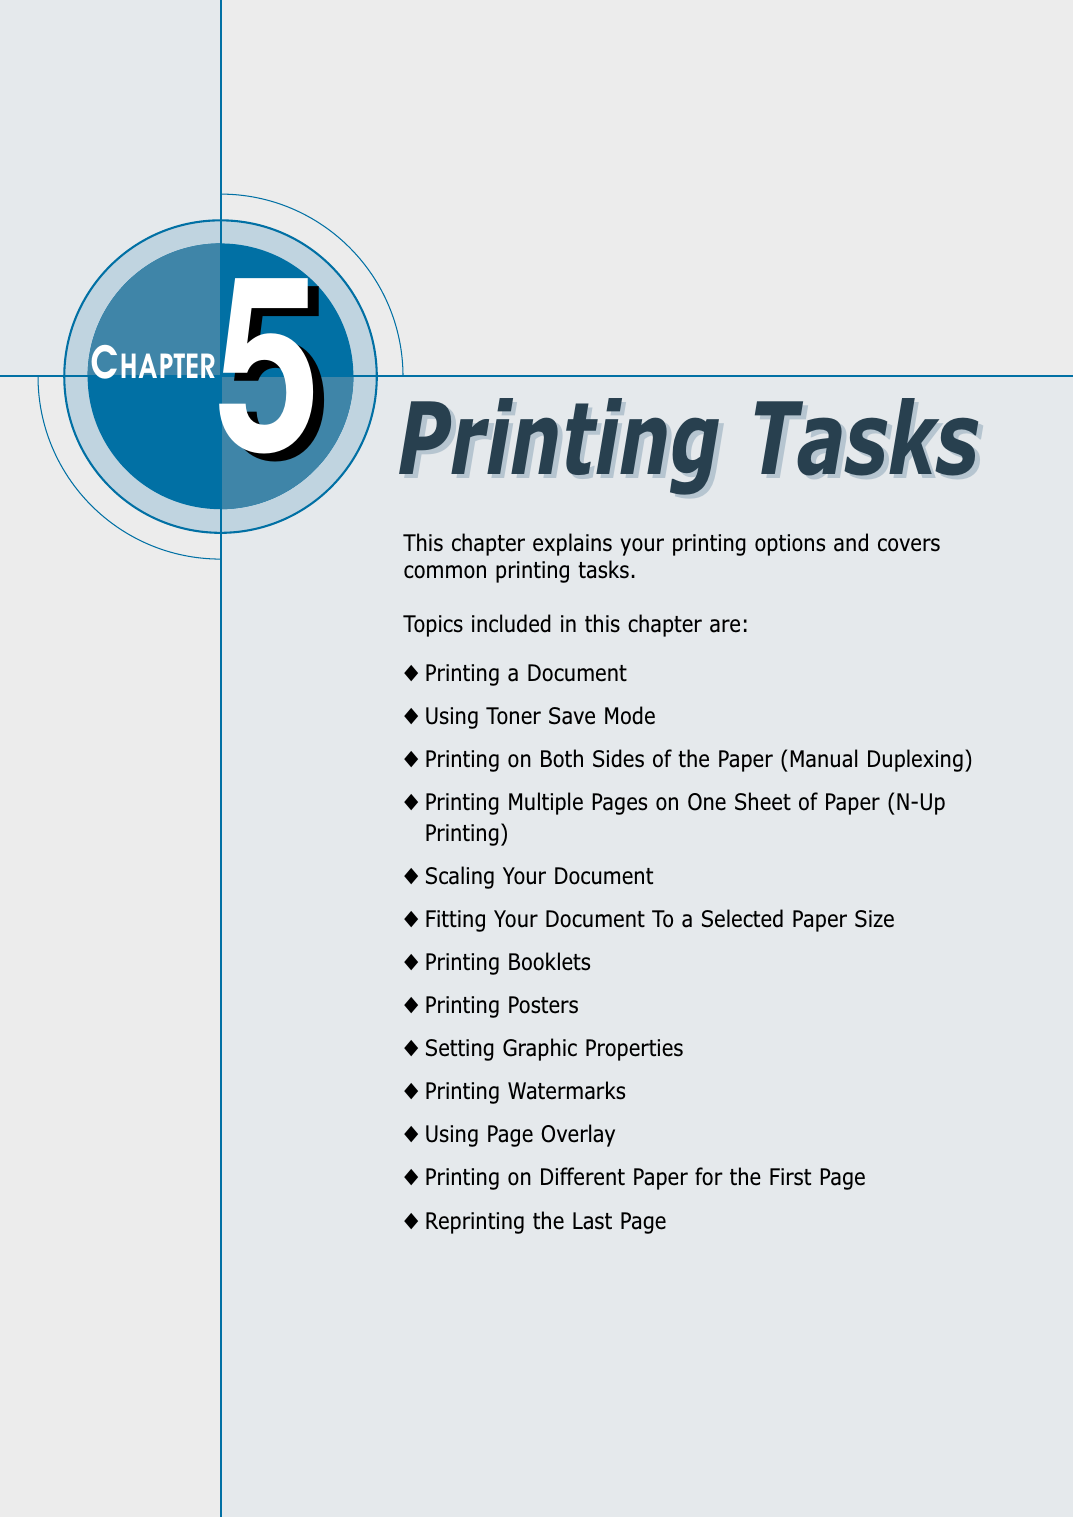 This chapter explains your printing options and coverscommon printing tasks.Topics included in this chapter are:◆ Printing a Document◆ Using Toner Save Mode◆ Printing on Both Sides of the Paper (Manual Duplexing)◆ Printing Multiple Pages on One Sheet of Paper (N-UpPrinting)◆ Scaling Your Document◆ Fitting Your Document To a Selected Paper Size ◆ Printing Booklets◆ Printing Posters◆ Setting Graphic Properties◆ Printing Watermarks◆ Using Page Overlay◆ Printing on Different Paper for the First Page◆ Reprinting the Last Page55CHAPTERPrinting TasksPrinting Tasks